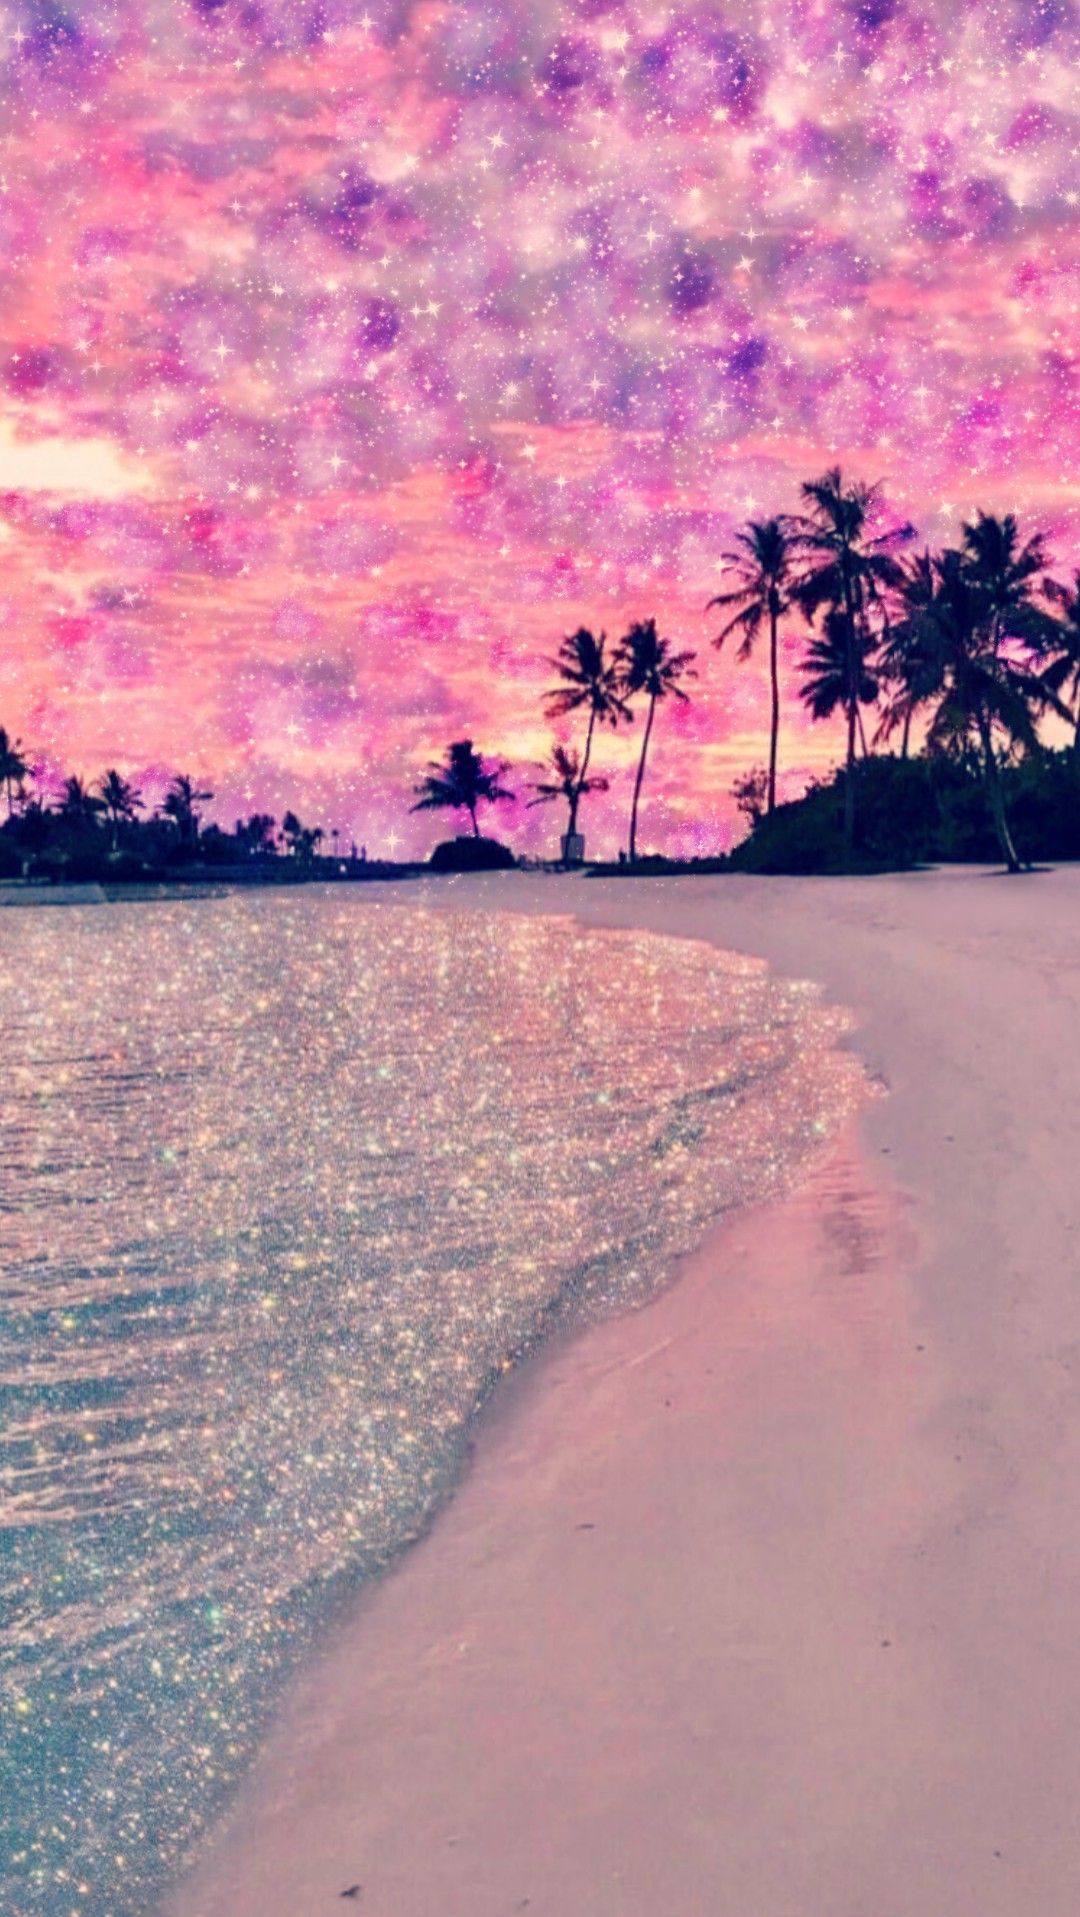 Galaxy Beach, made by me #purple #sparkly #wallpaper #background